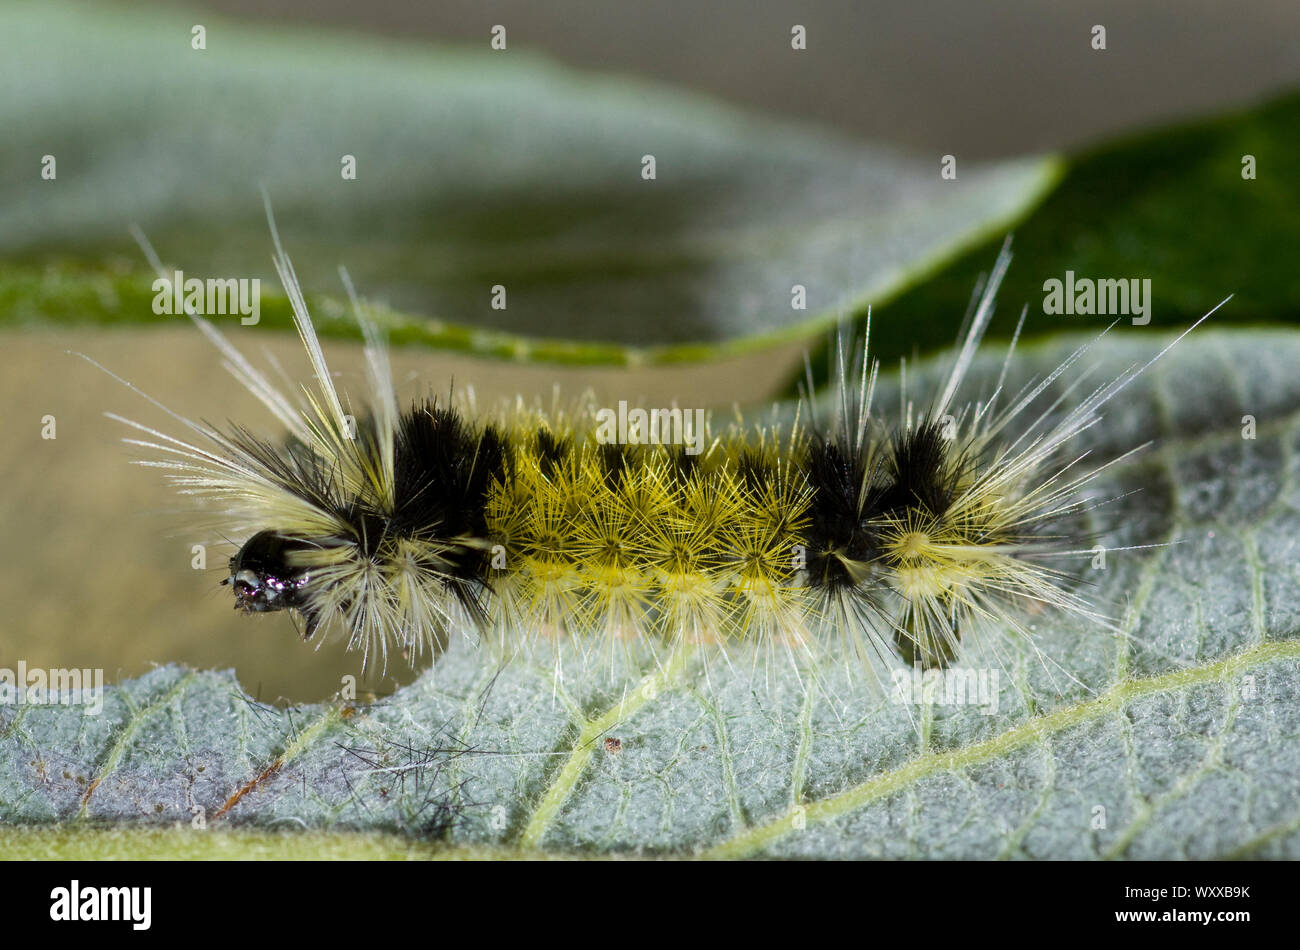 The Spotted Tussock Moth (Lophocampa maculata) is a member of the family Erebidae. The larvae feed on leaves of alder, willow and other hardwoods. It Stock Photo